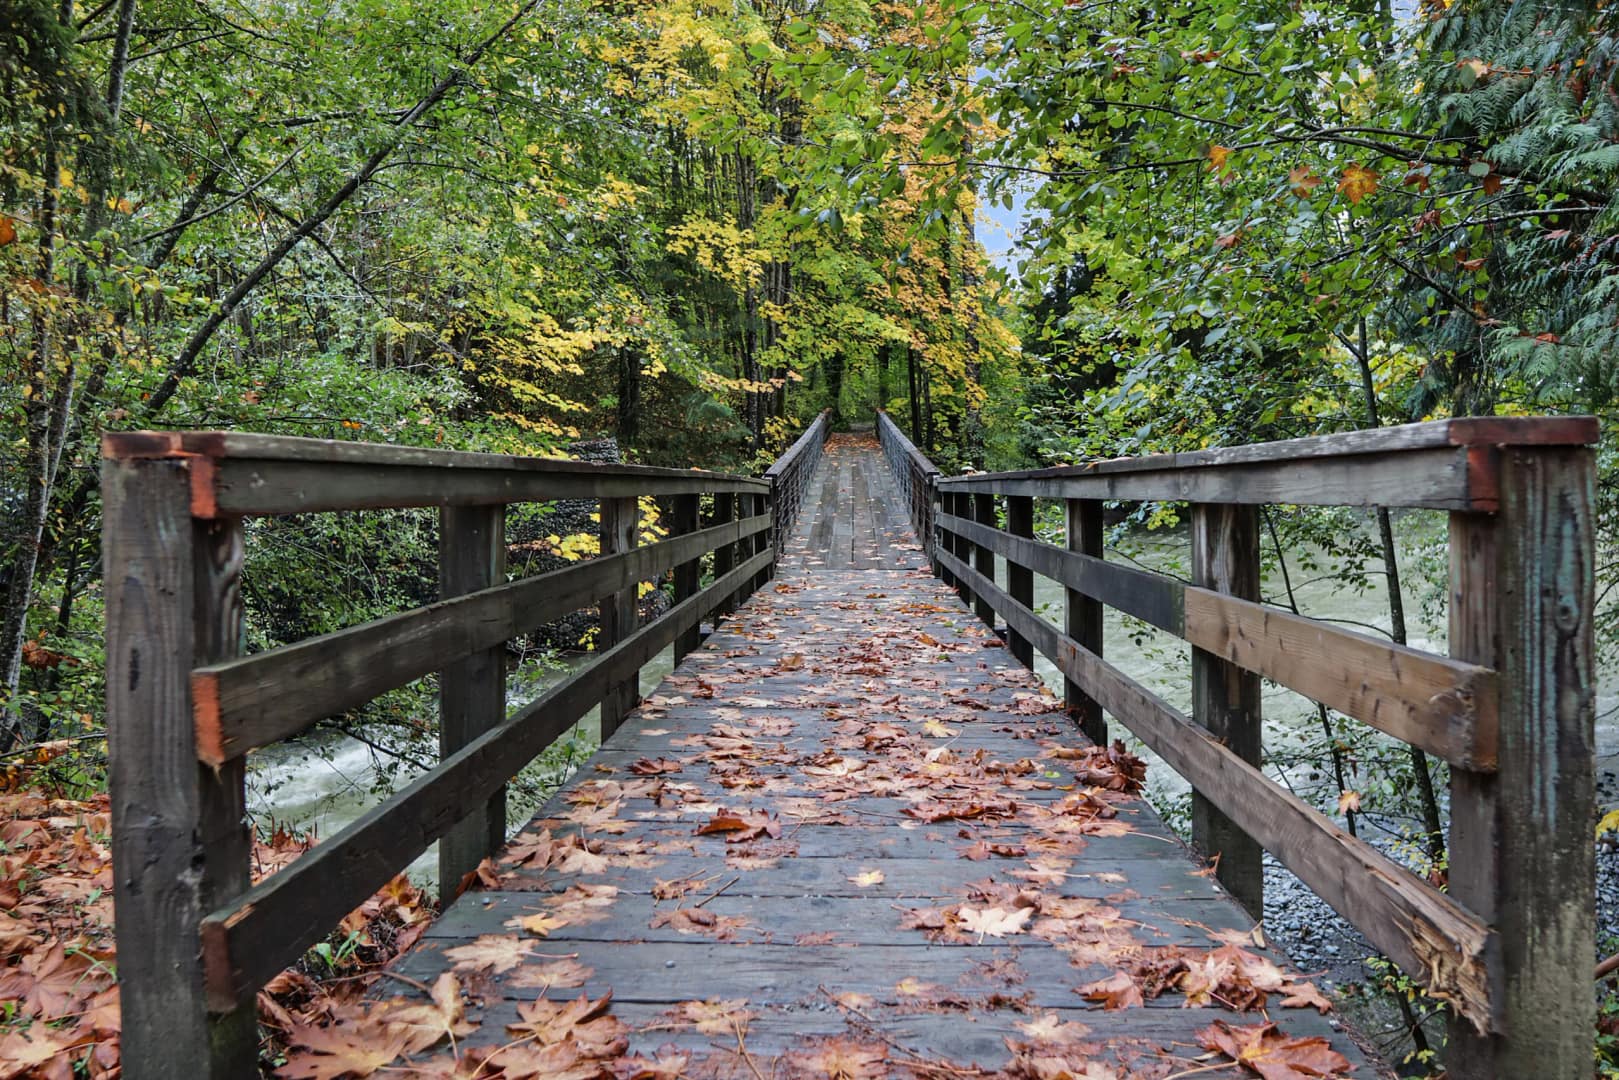 A wooden bridge strewn with fallen autumn leaves leads through a forest on Vancouver Island, with trees displaying vibrant green and yellow foliage on either side.